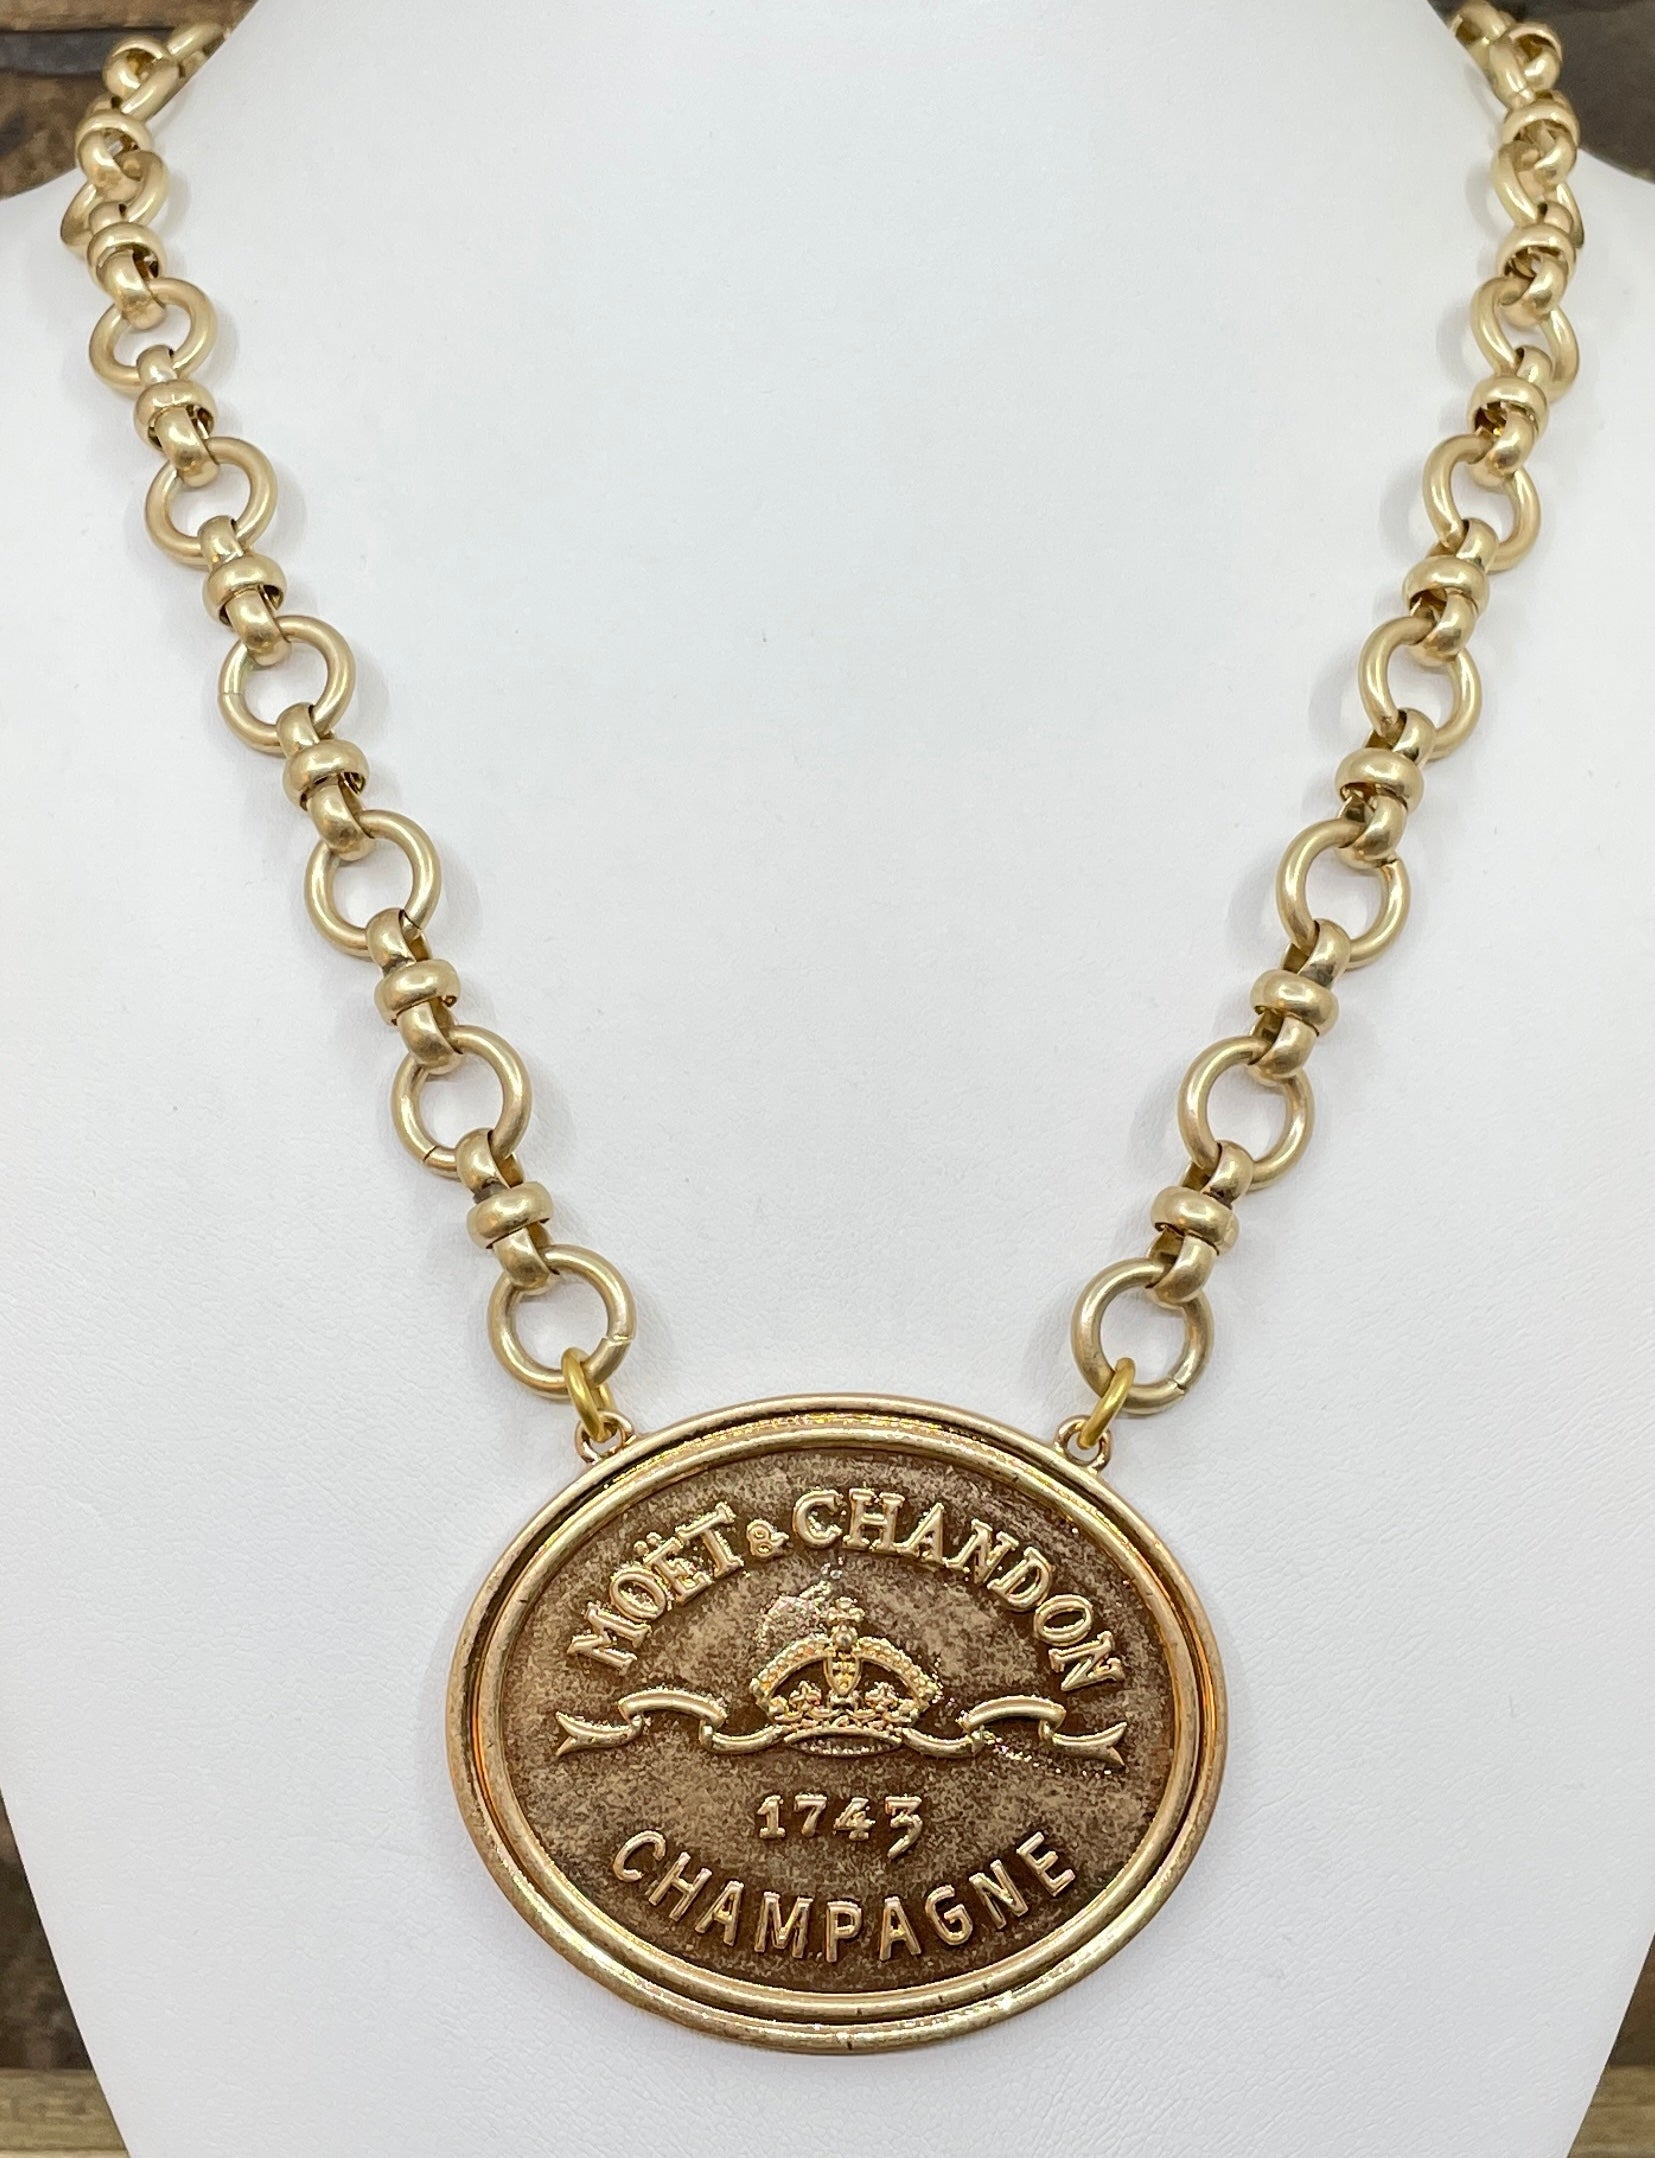 Vintage Chain with Champagne Pendant